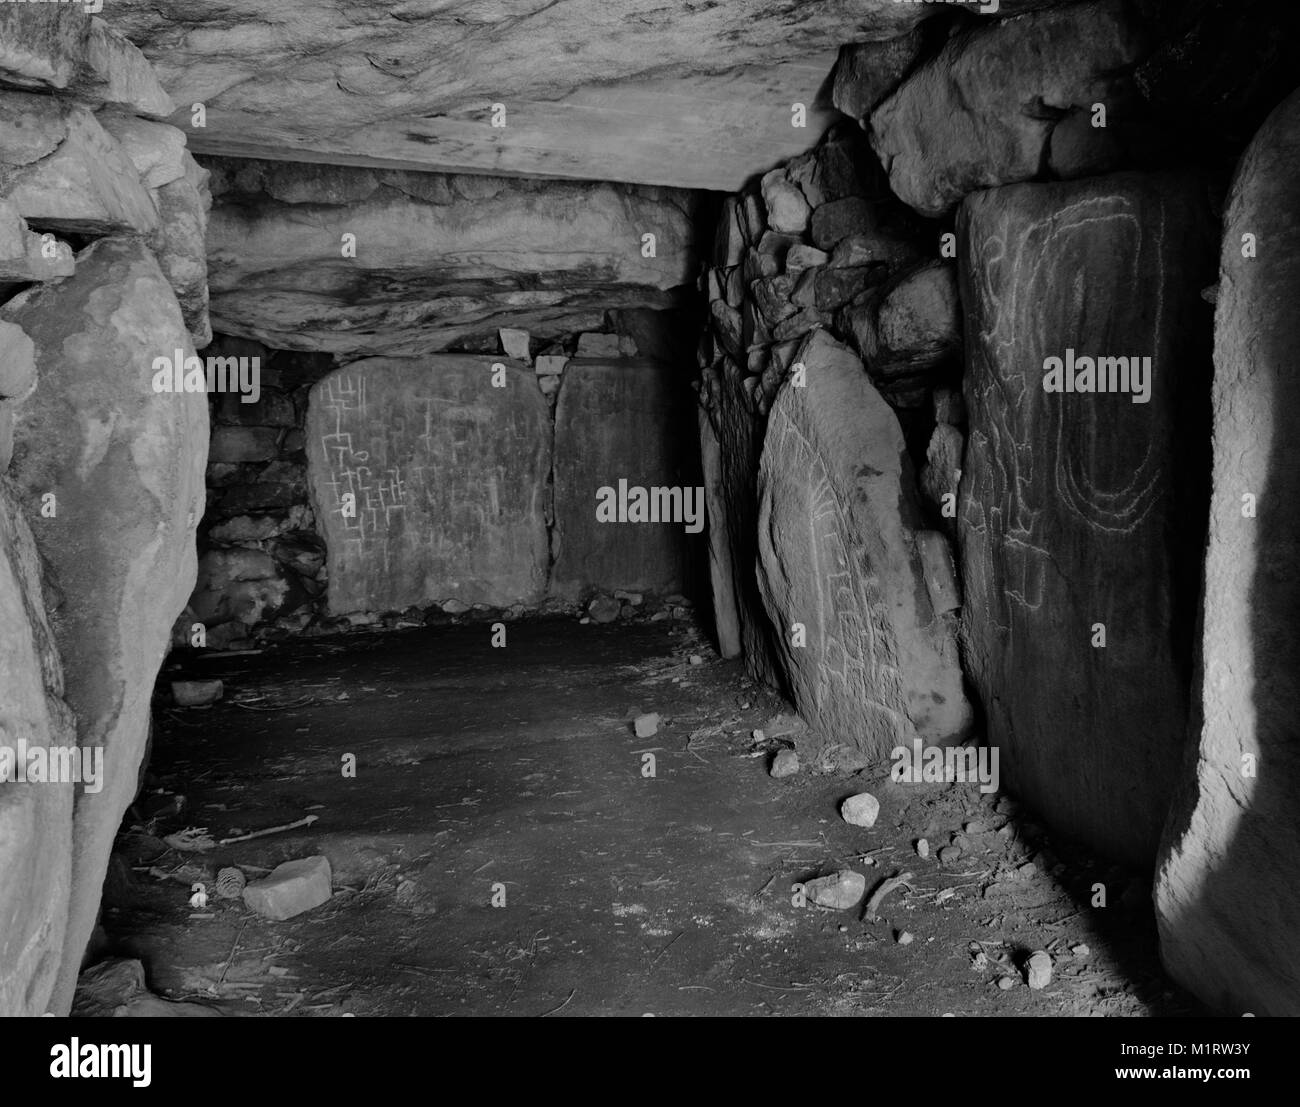 Megalithic art in the chamber of Mané Kerioned (E) Neolithic passage grave, Plouharnel, Brittany, France. View of burial chamber at N end of passage. Stock Photo